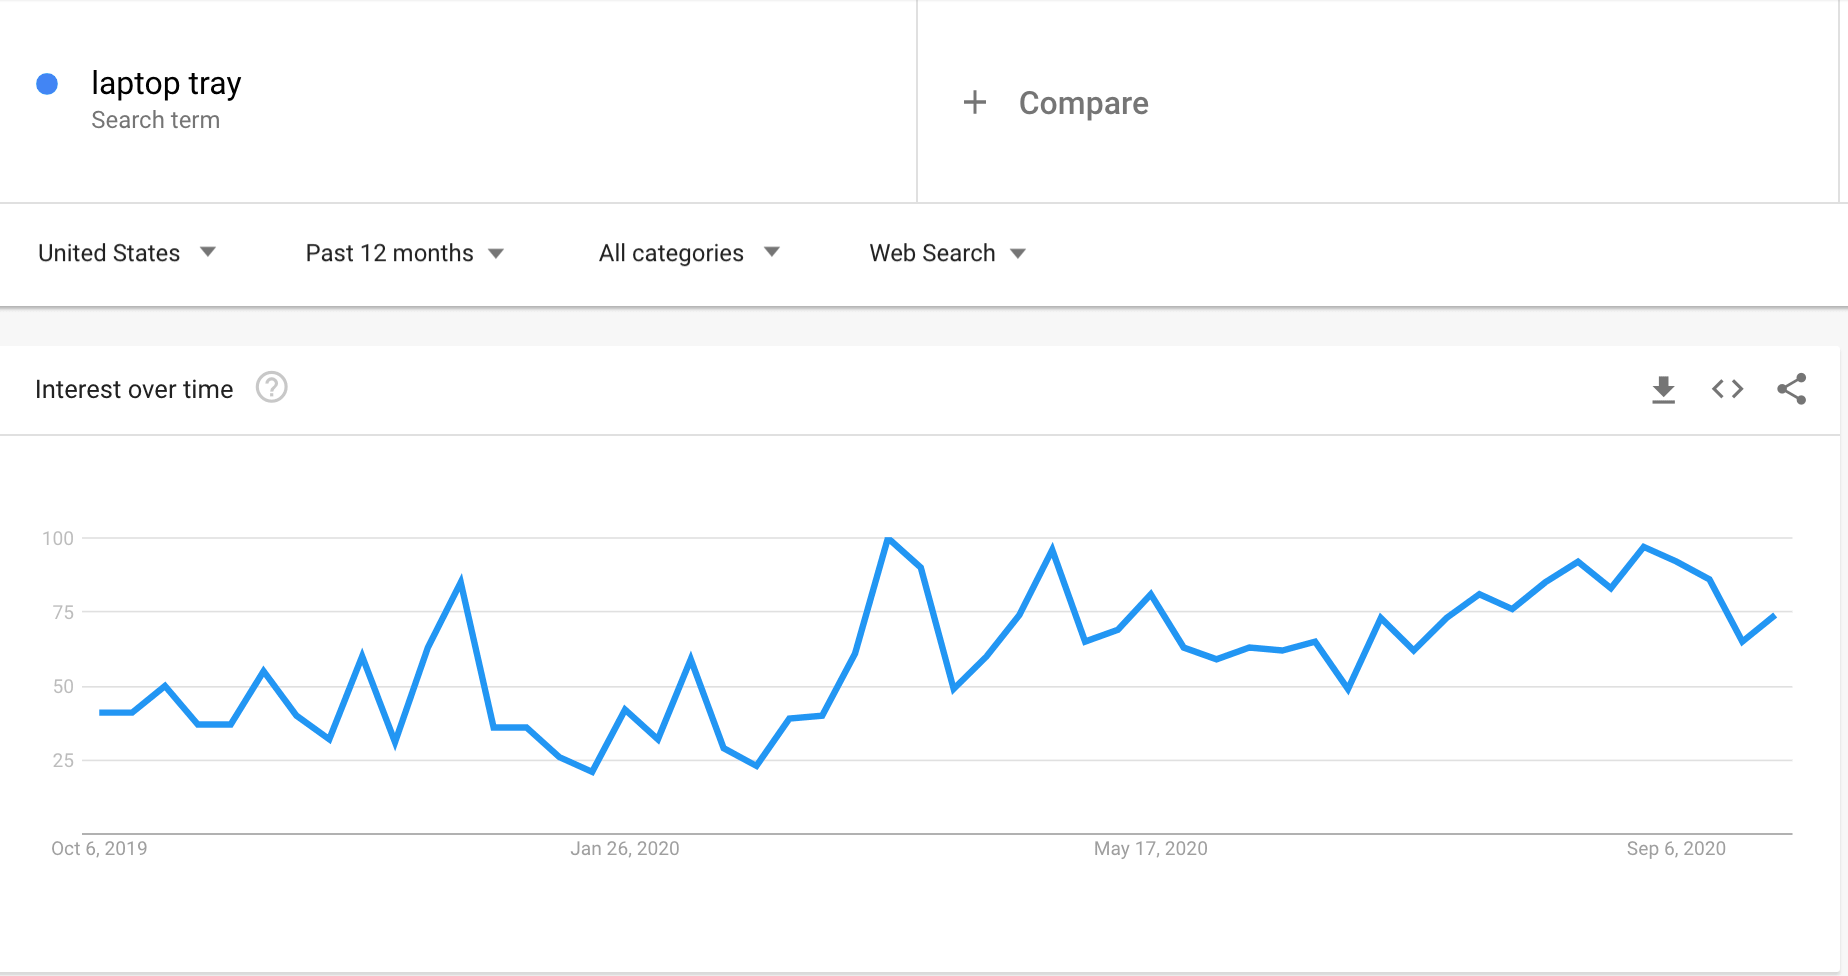 Google Trends graph showing the interest in laptop trays